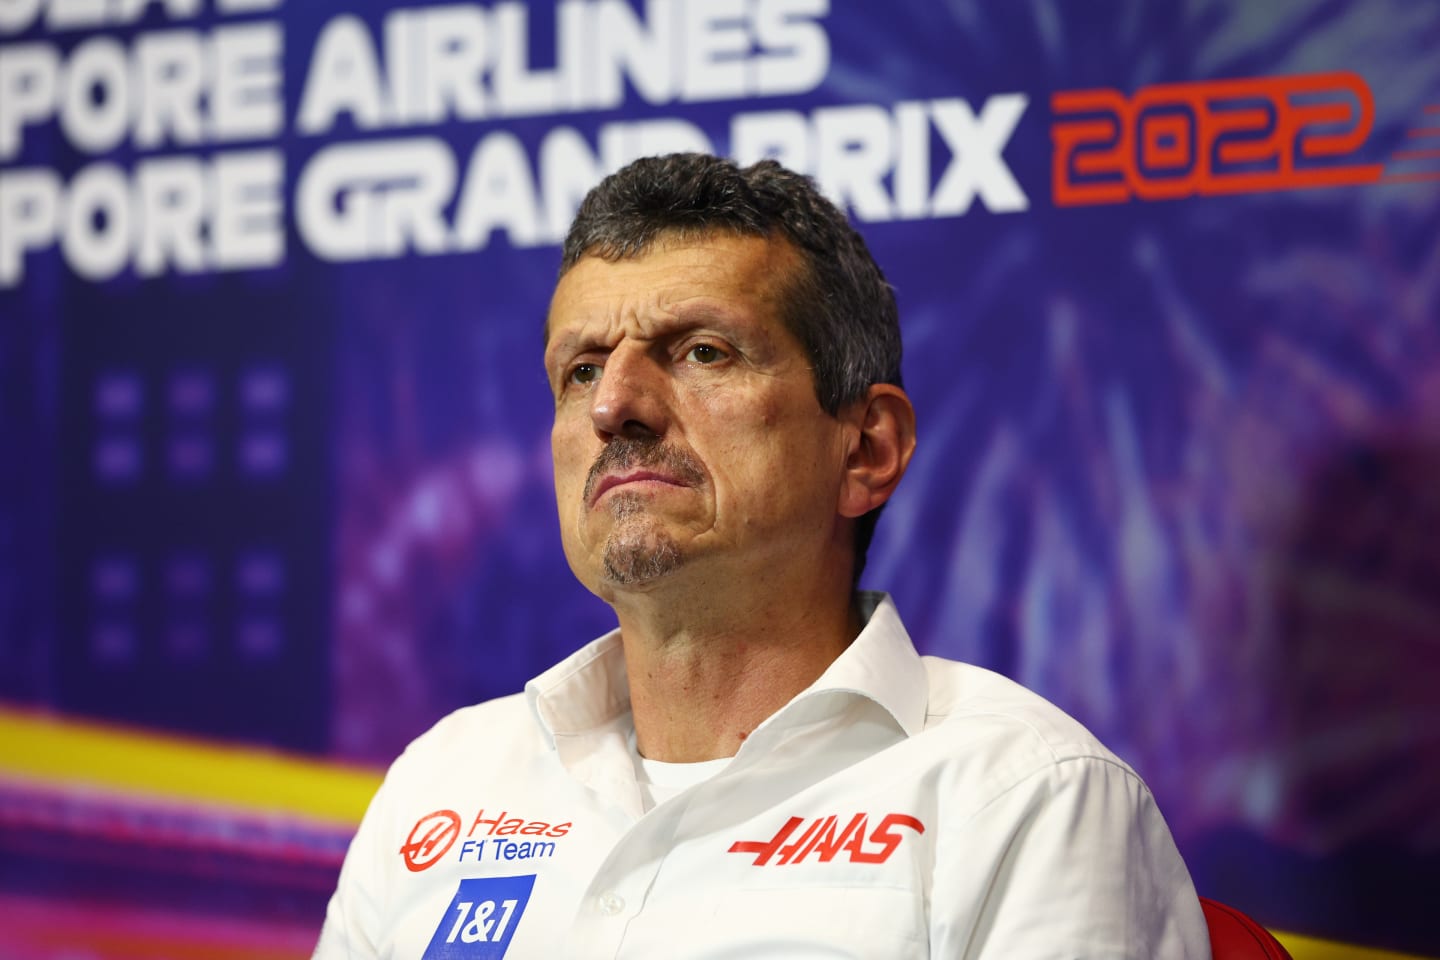 SINGAPORE, SINGAPORE - OCTOBER 01: Haas F1 Team Principal Guenther Steiner talks in the team principal's press conference before final practice ahead of the F1 Grand Prix of Singapore at Marina Bay Street Circuit on October 01, 2022 in Singapore, Singapore. (Photo by Clive Rose/Getty Images,)